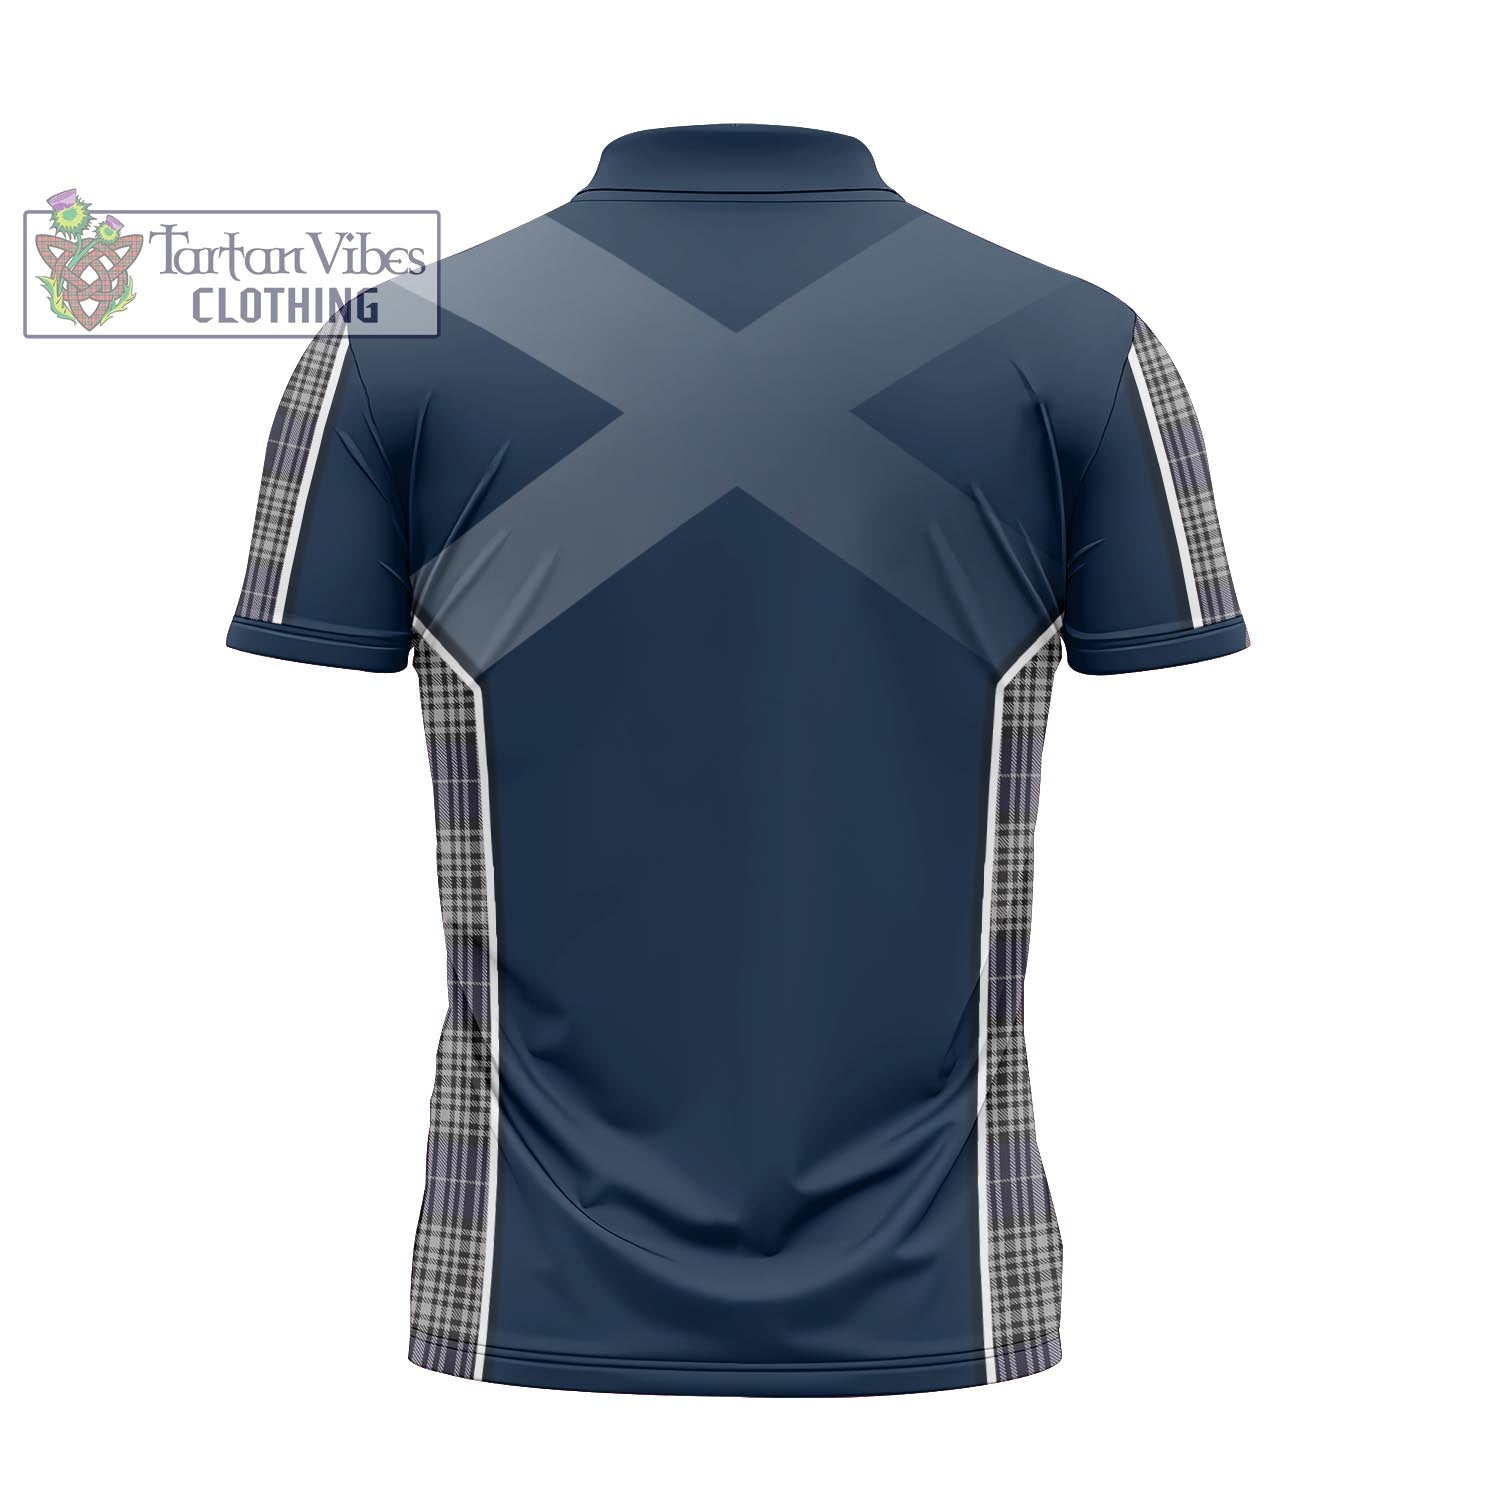 Tartan Vibes Clothing Napier Tartan Zipper Polo Shirt with Family Crest and Scottish Thistle Vibes Sport Style